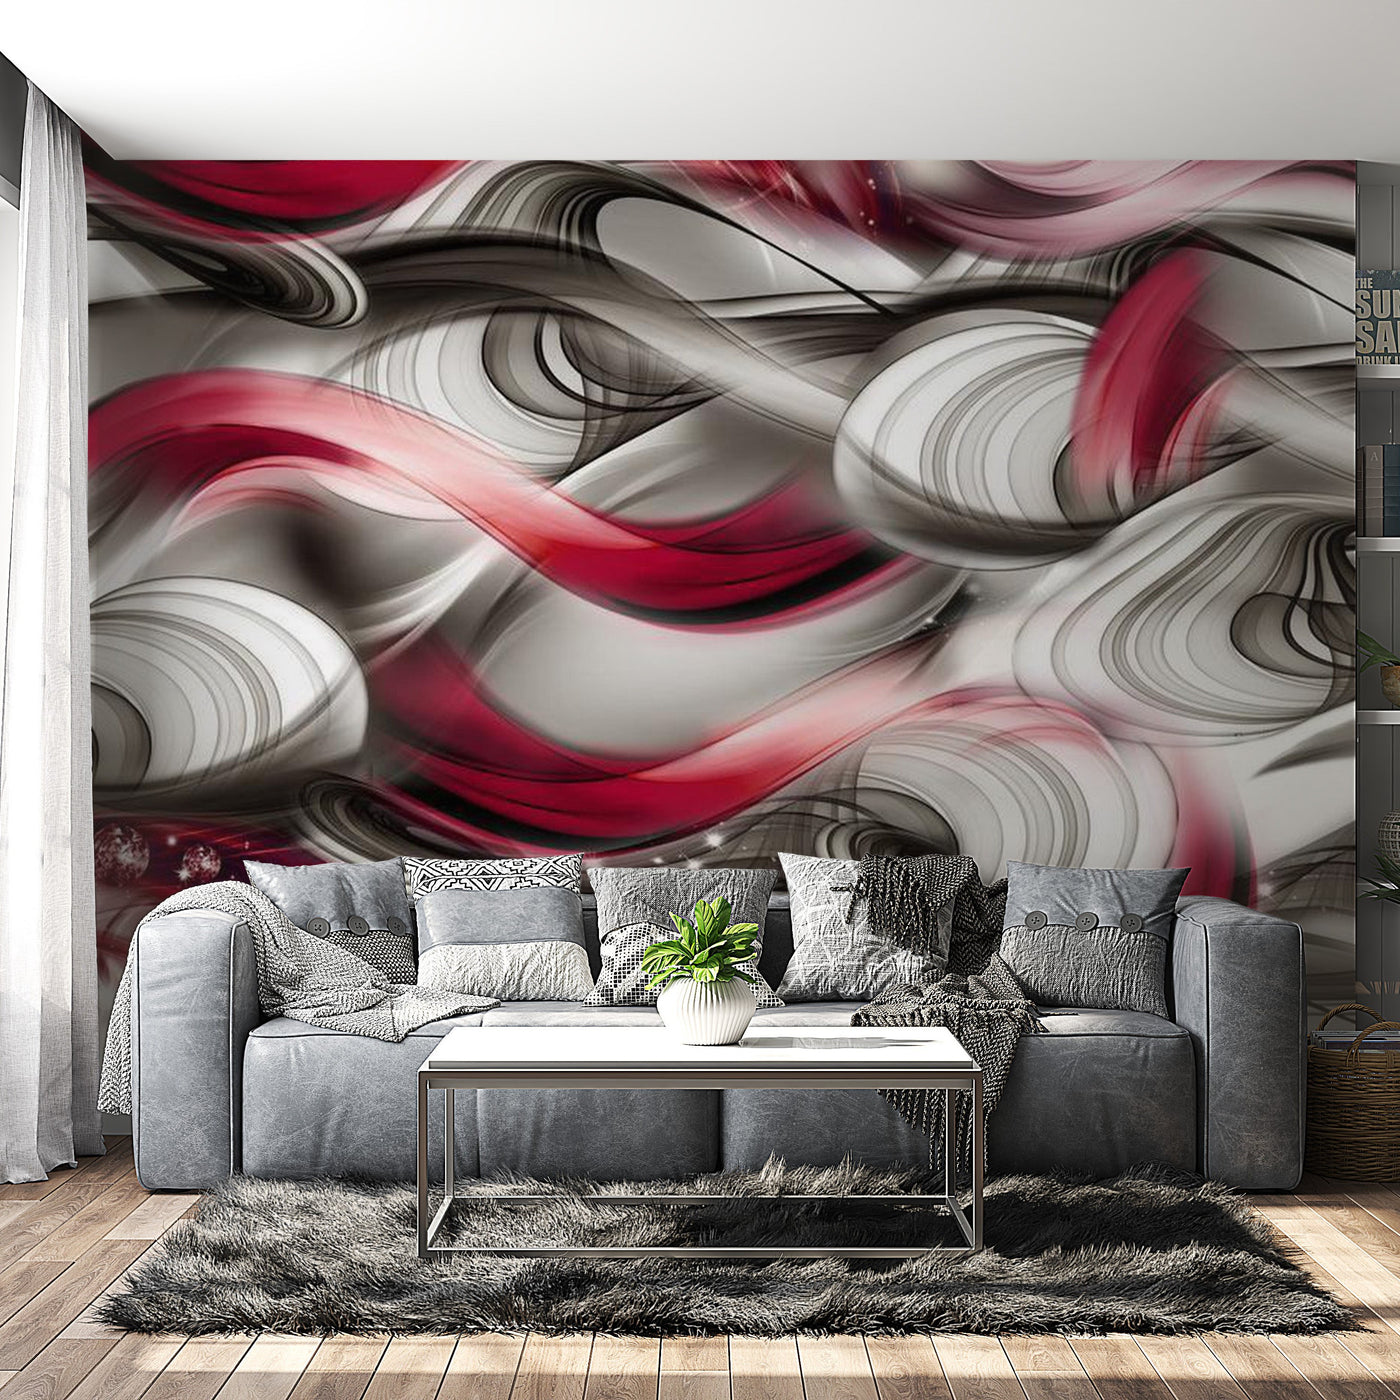 Peel & Stick Glam Wall Mural - Rush Of Emotions - Removable Wall Decals